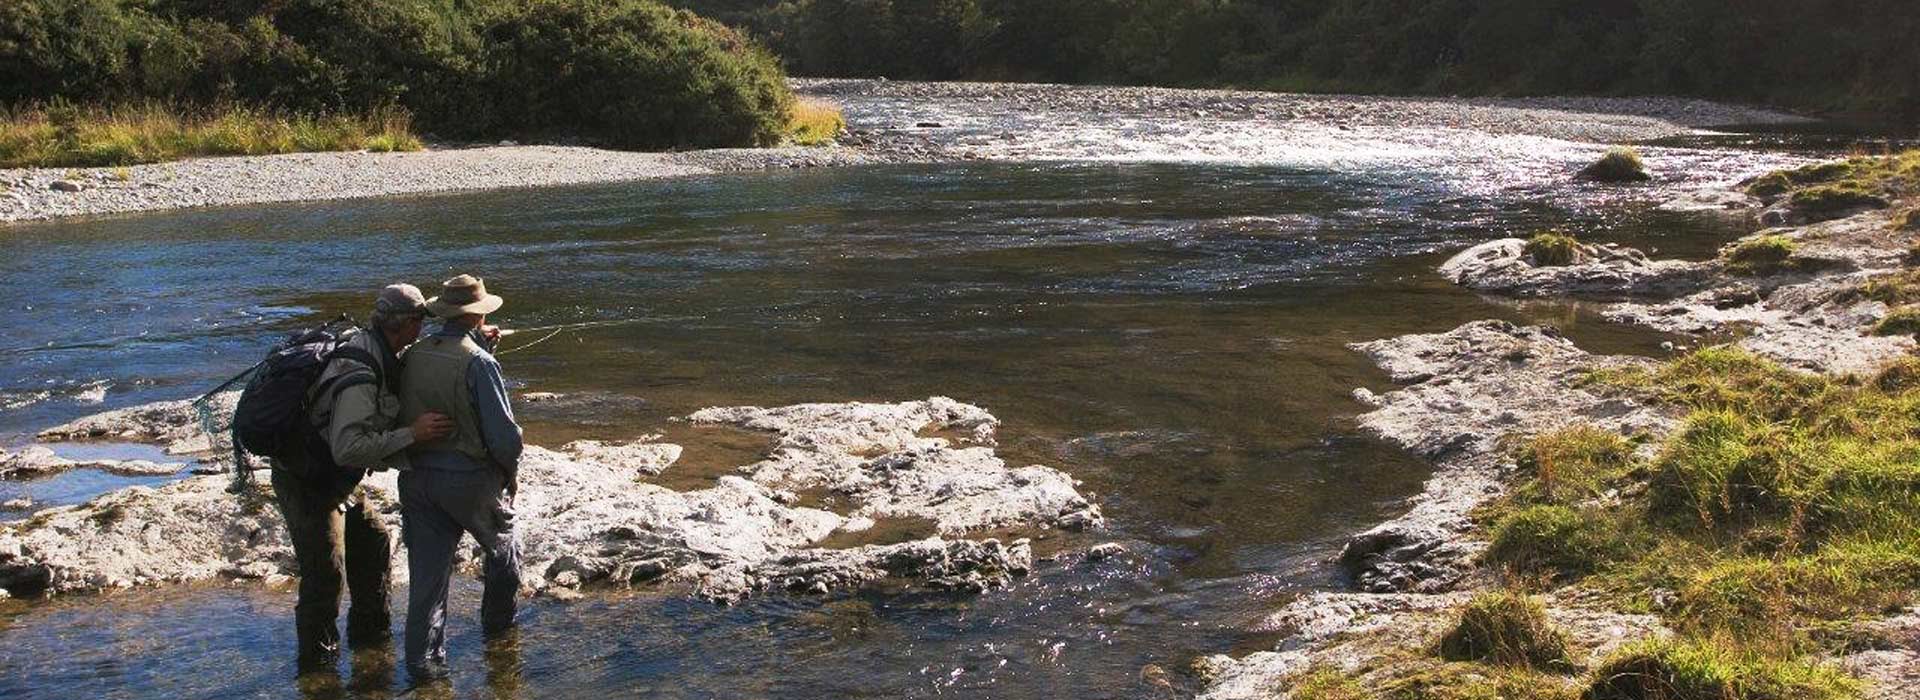 Trout fishing guide for the top of New Zealand's South Island